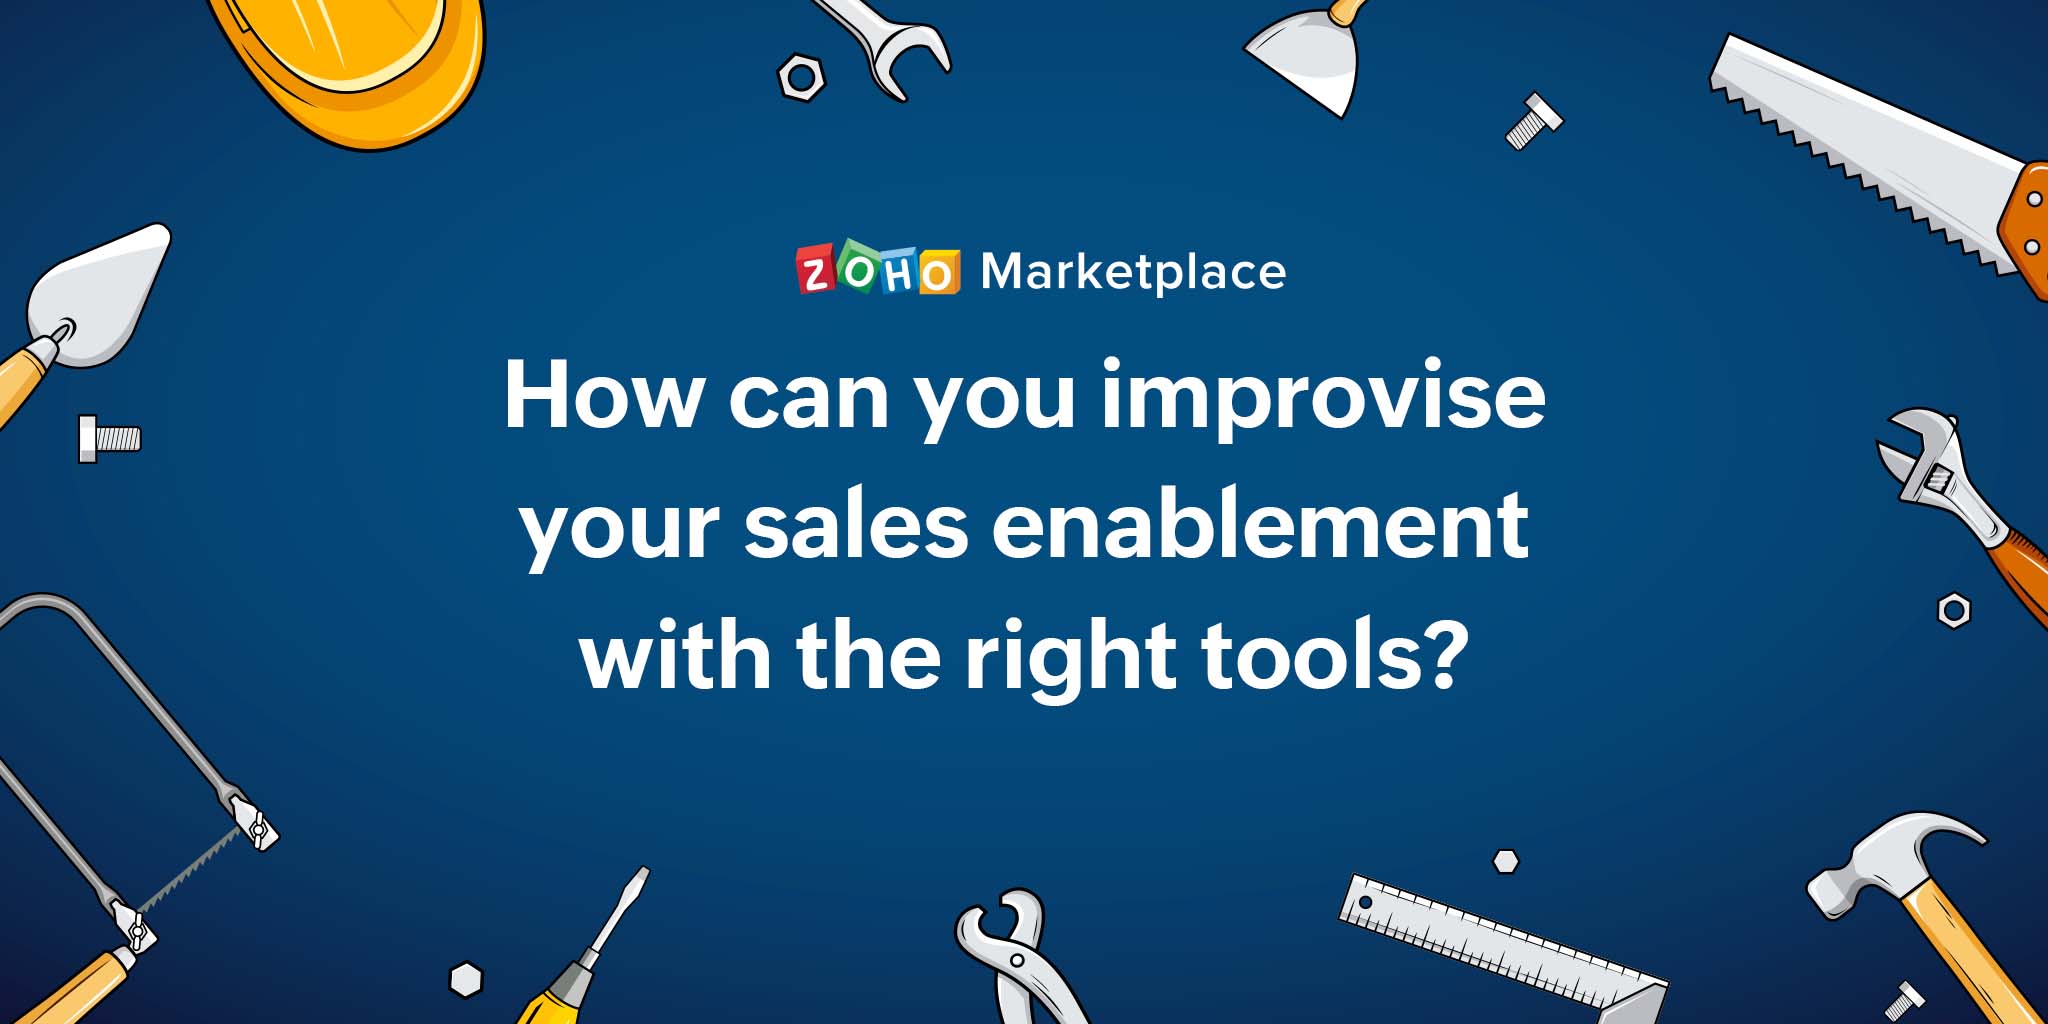 How can you improvise your sales enablement with the right tools?